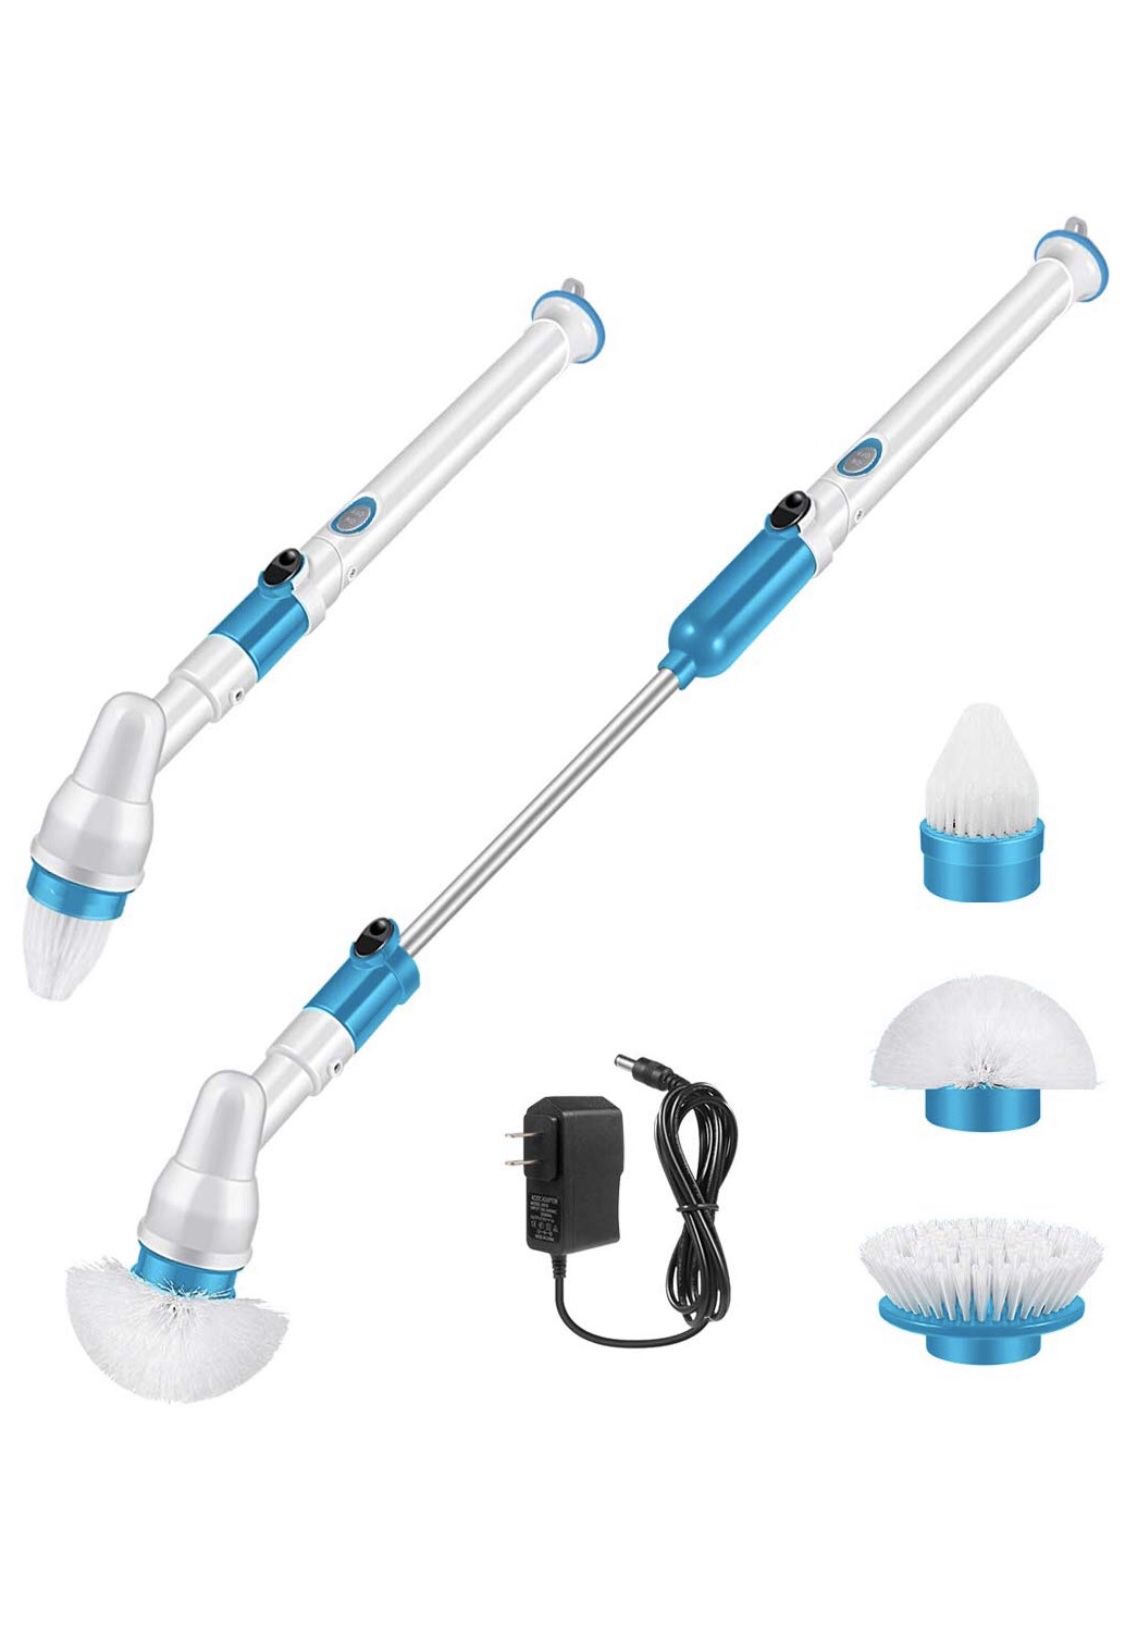 Spin Scrubber, 360 Cordless Tub and Tile Scrubber, Multi-Purpose Power Surface Cleaner with 3 Replaceable Cleaning Scrubber Brush Heads, 1 Extension